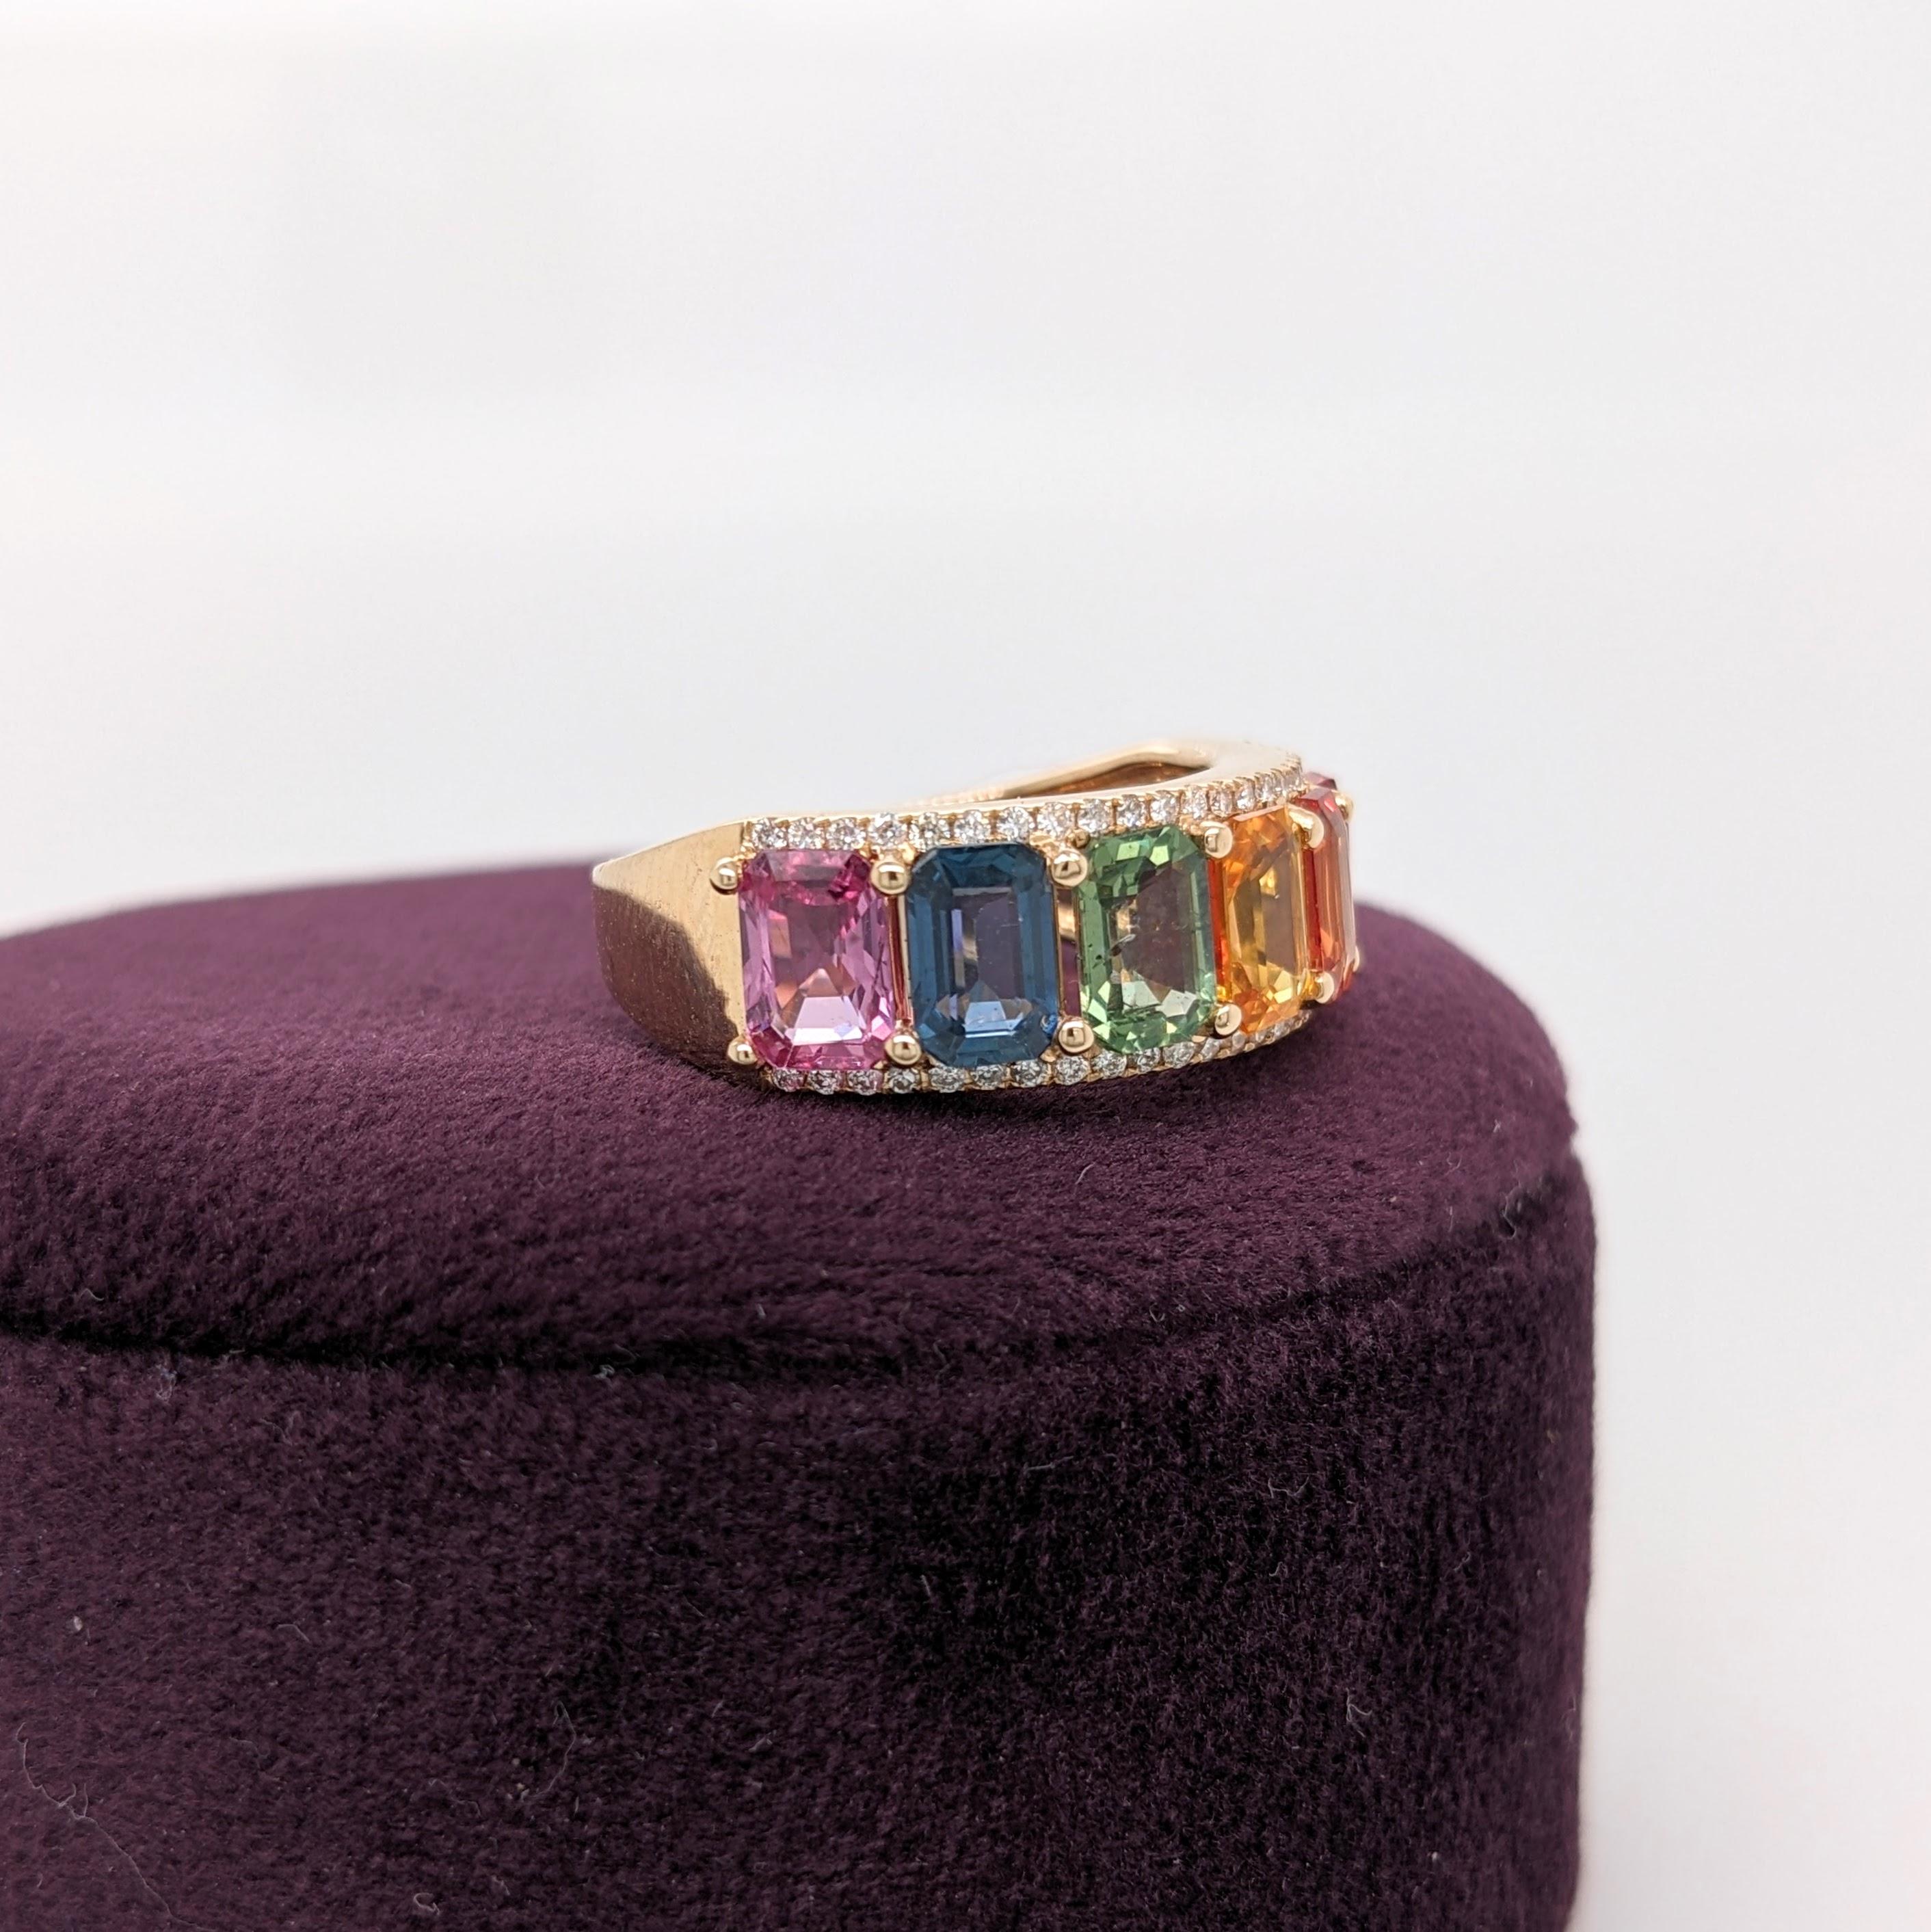 8.6ct Rainbow Sapphire w Diamond Accents in Solid 14k Gold Emerald Cut 5x4mm For Sale 5